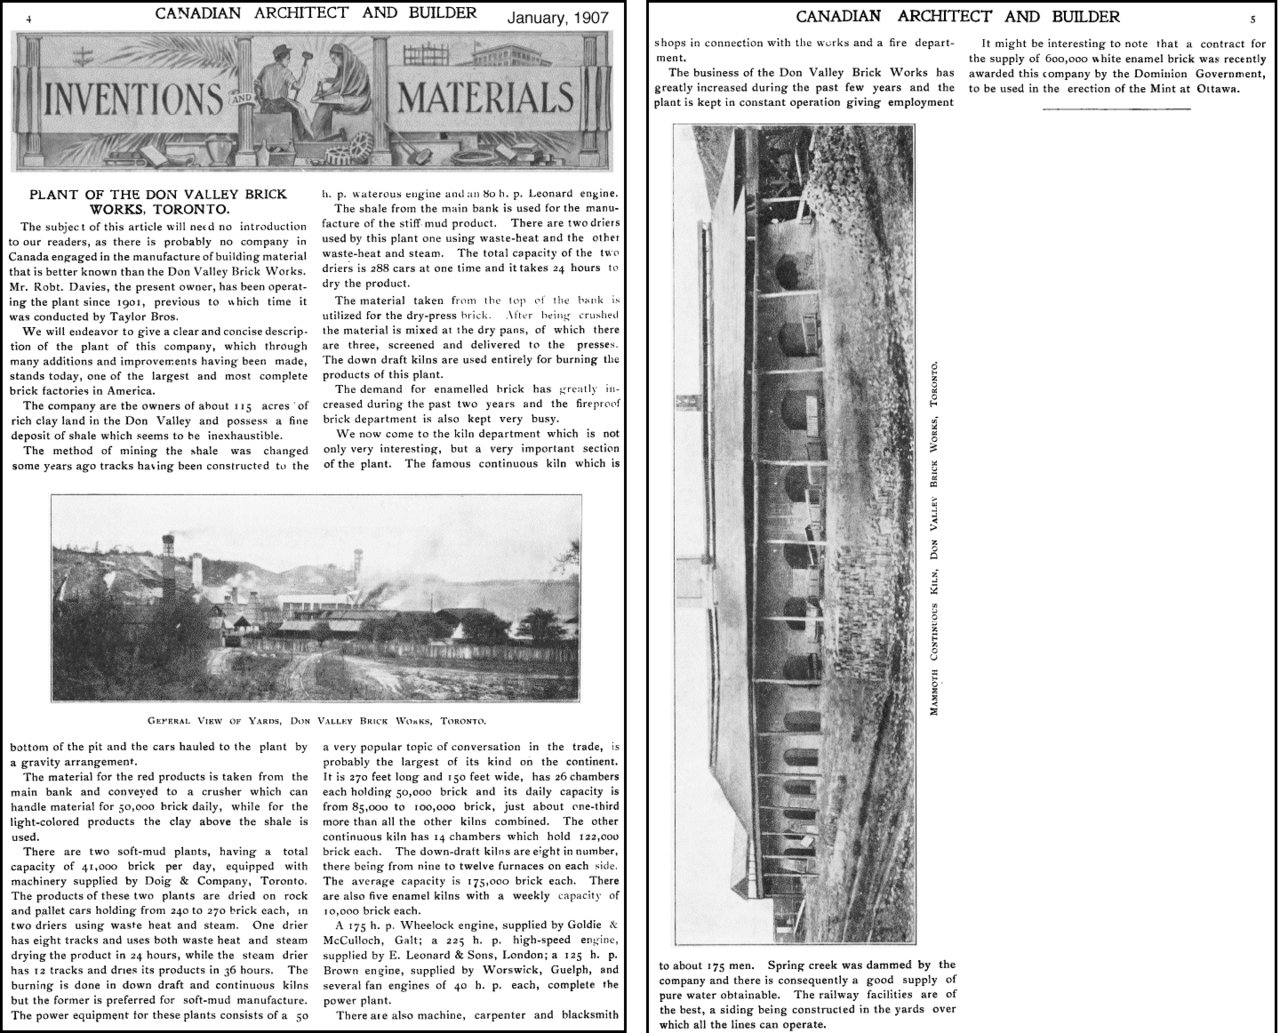 The Canadian Architect and Builder, Jan-1907.jpg